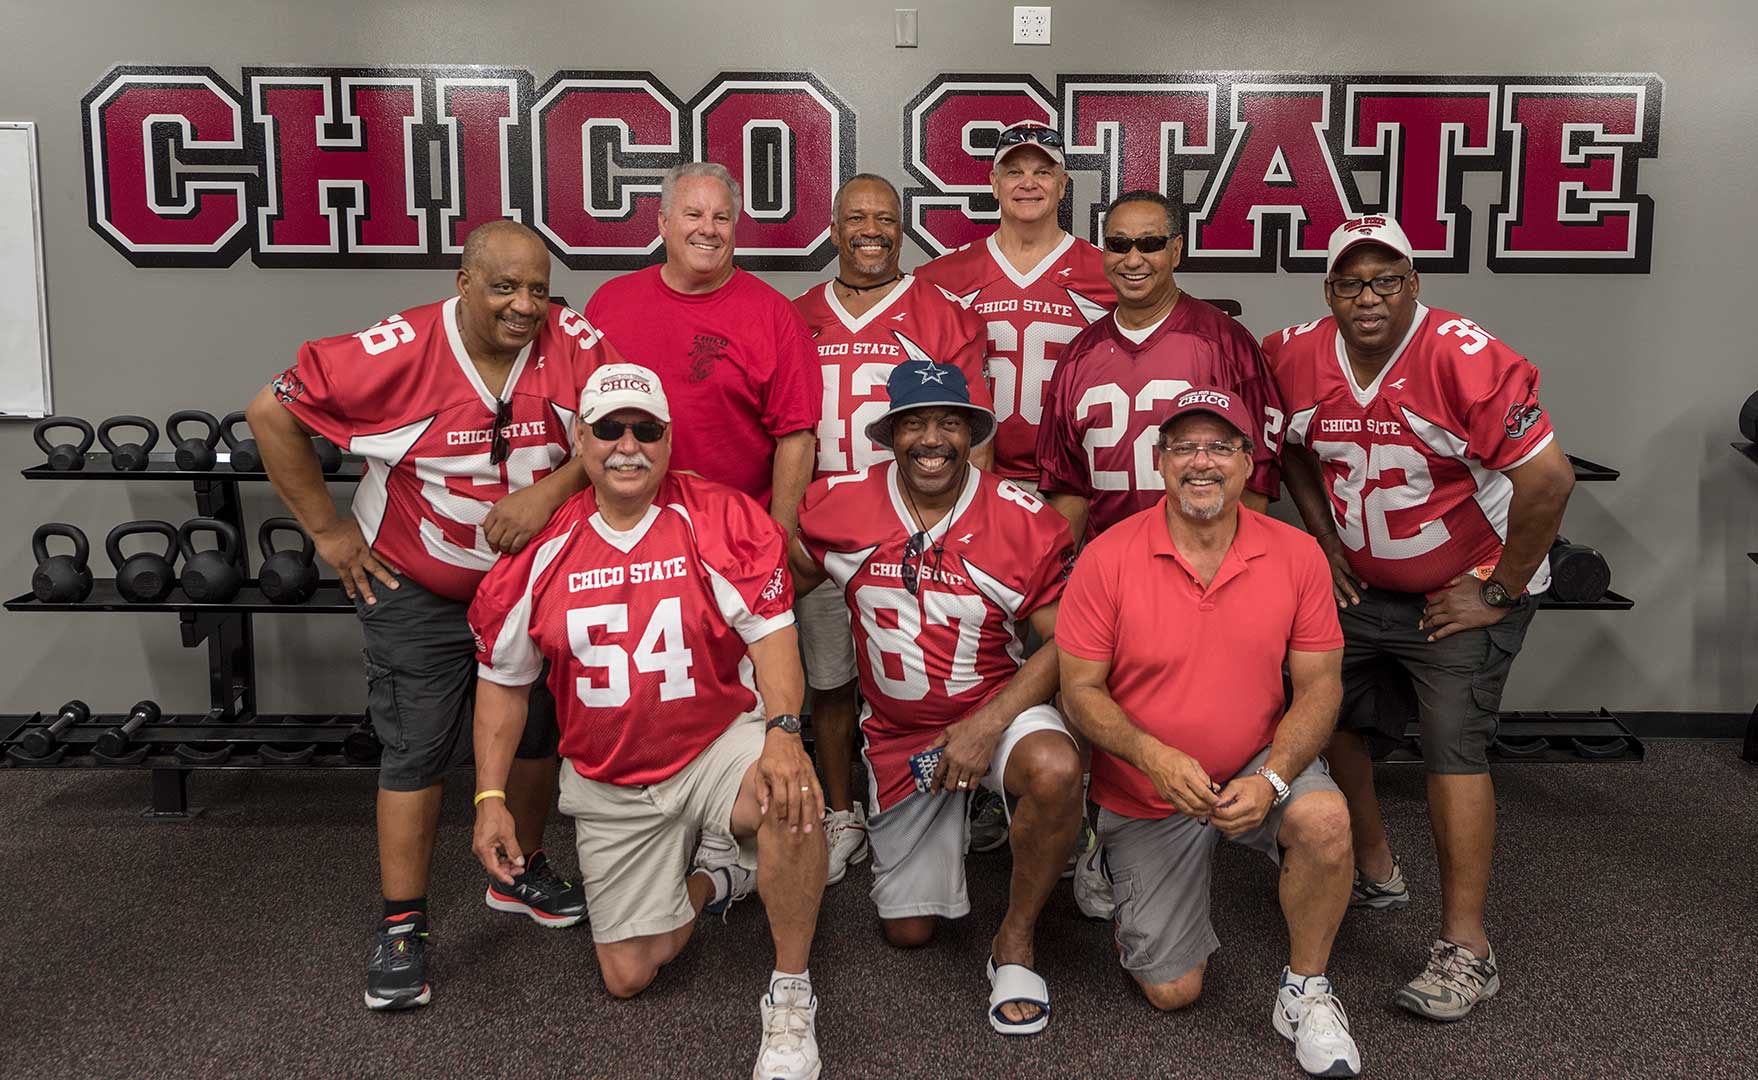 Wildcat alumni of the Chico State football team came back to check out the new Strength & Conditioning Center during their three-day reunion to reminisce about their time playing the game. 